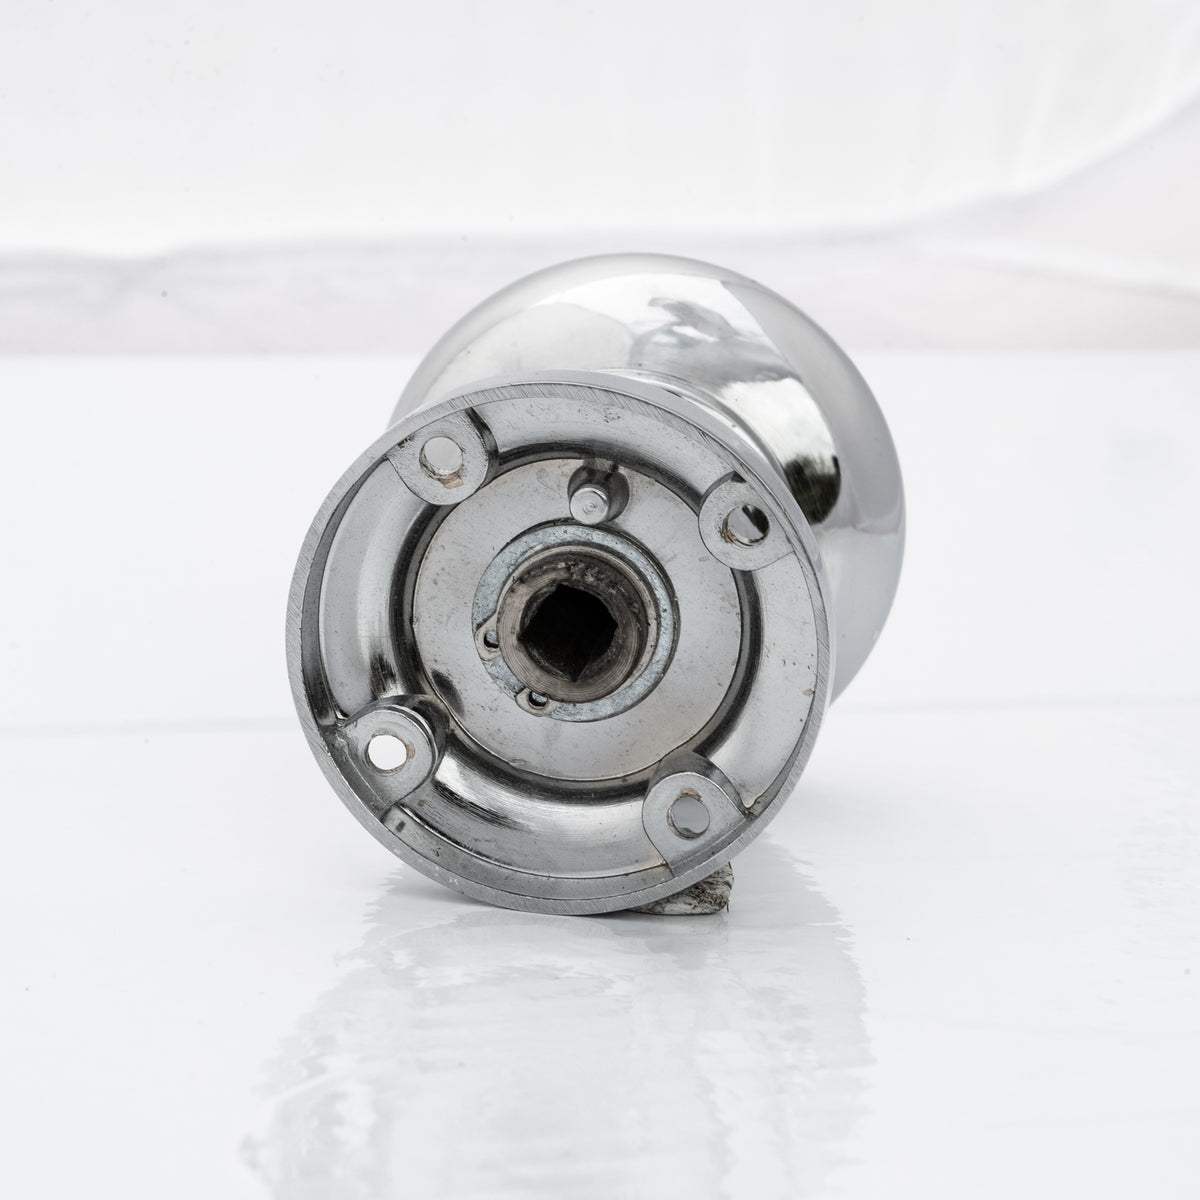 Reclaimed Polished Chrome Door Knob | The Architectural Forum